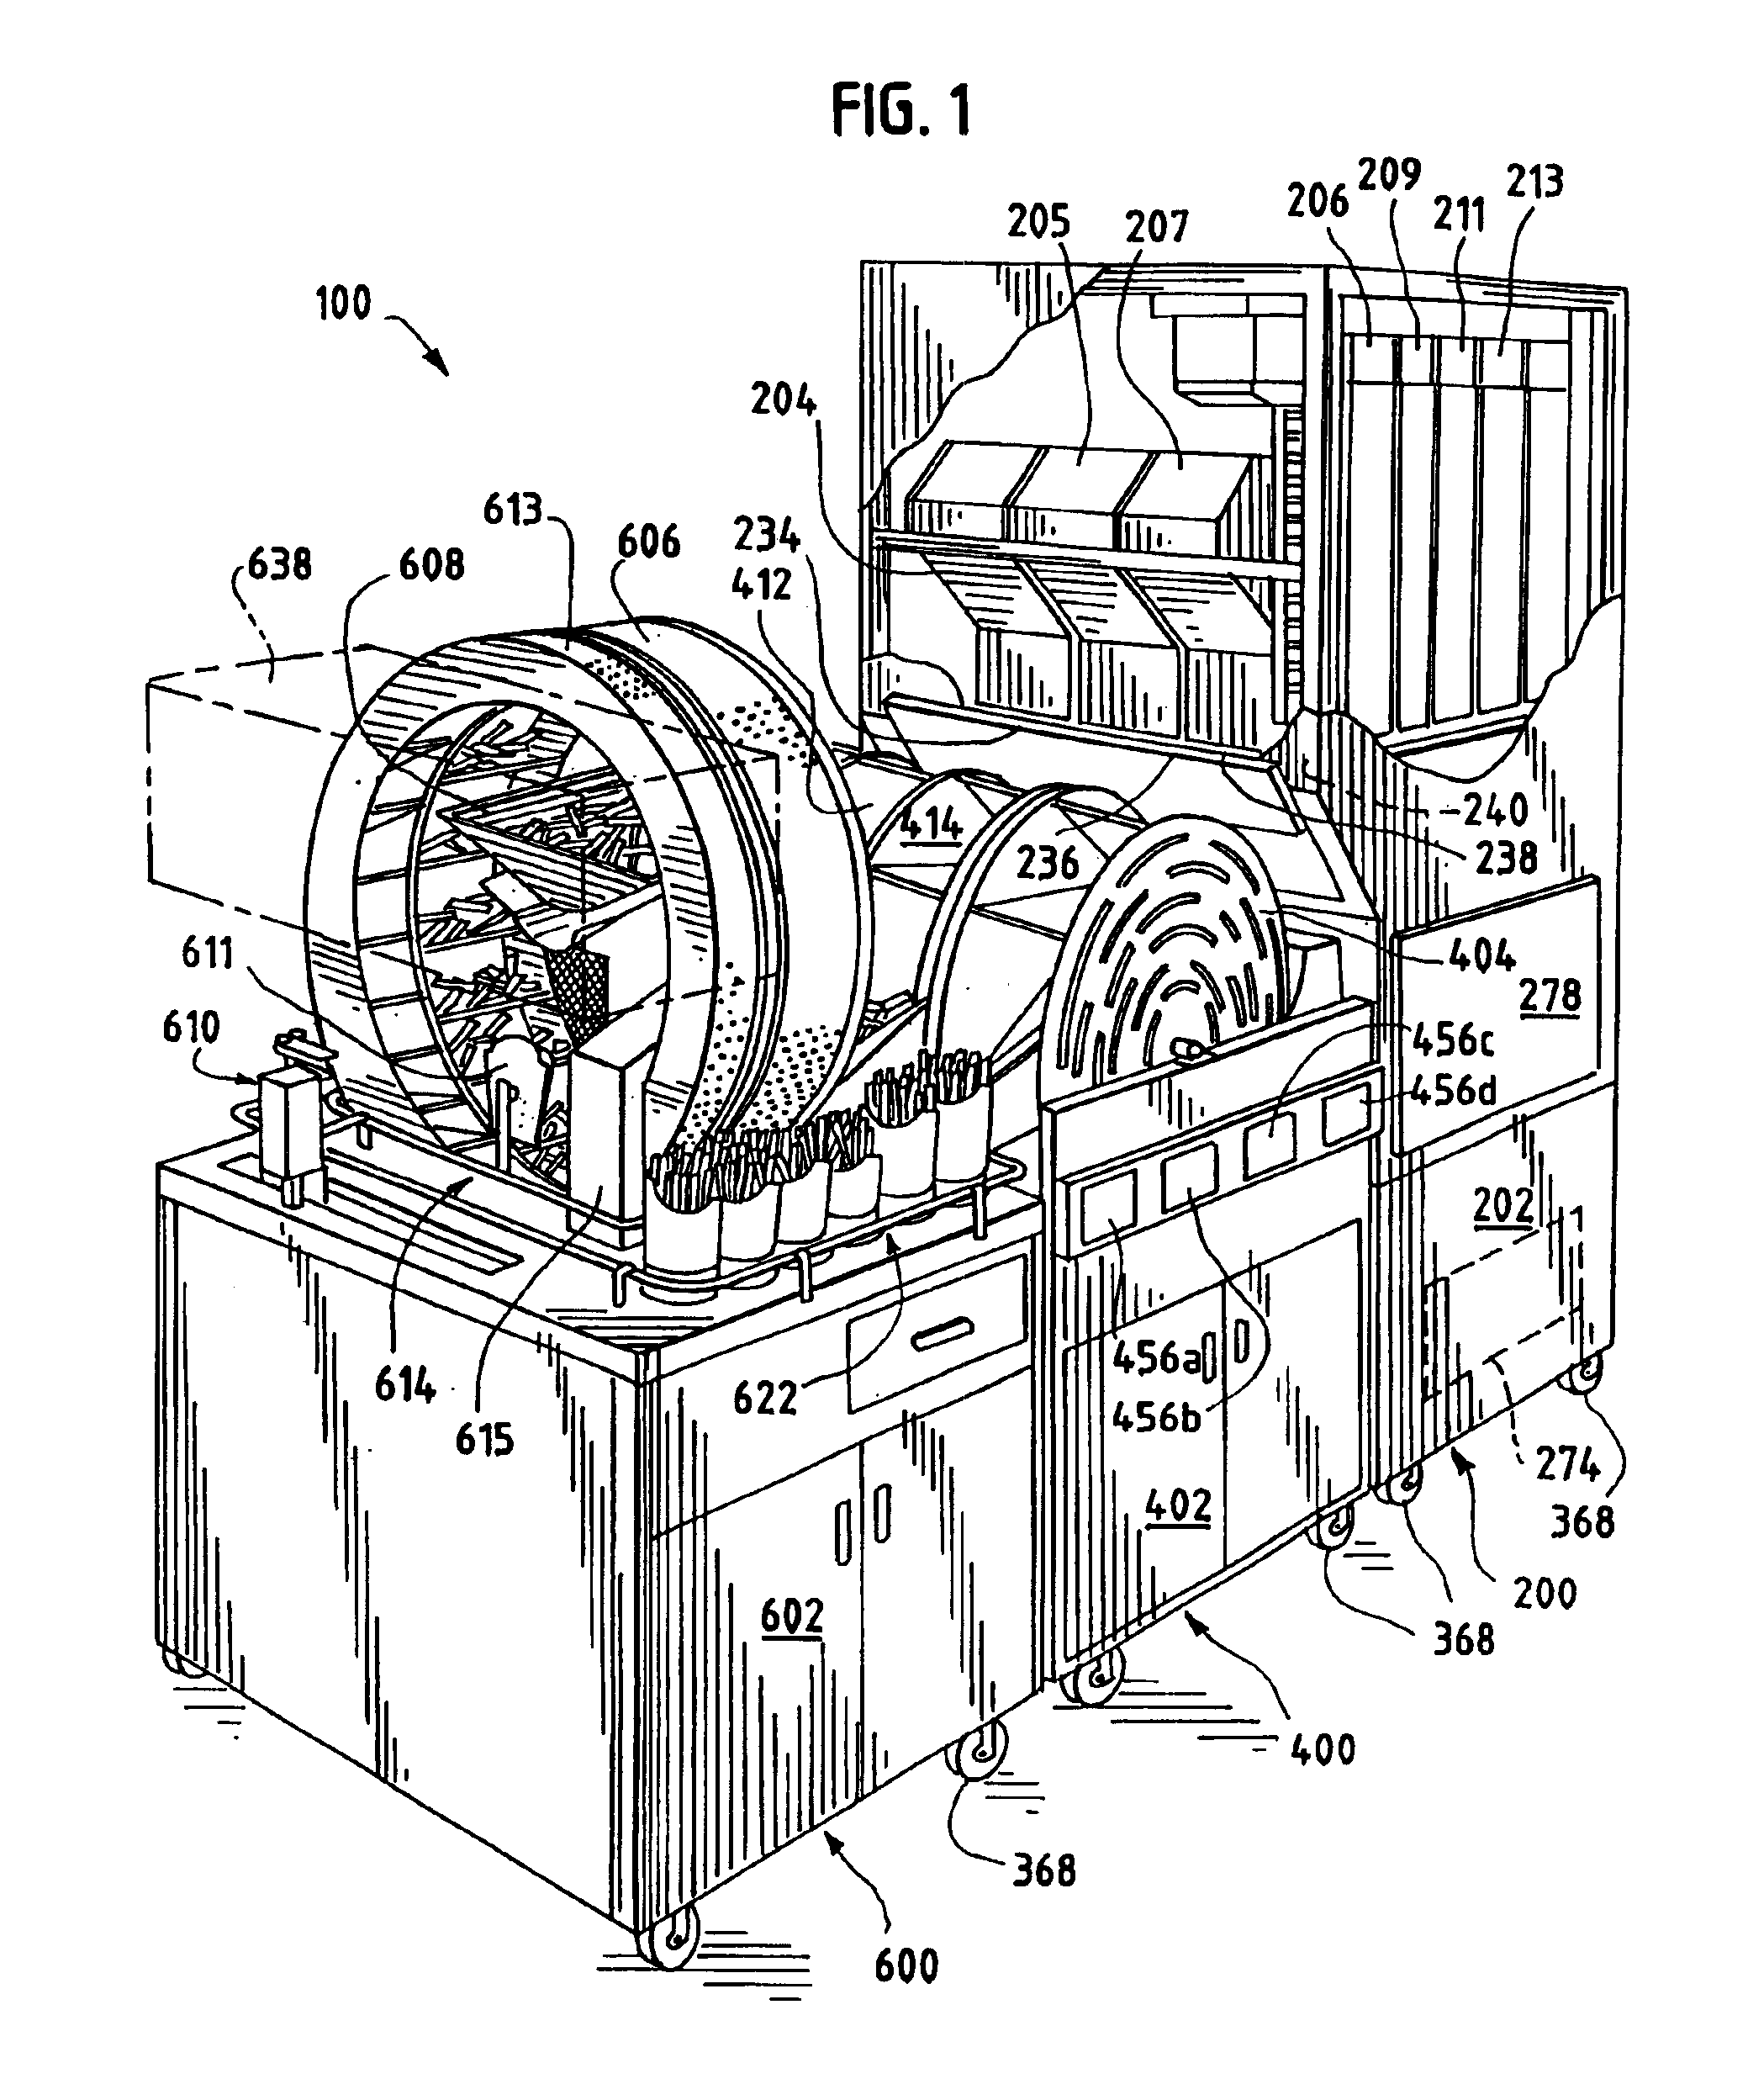 Automated device and method for packaging food